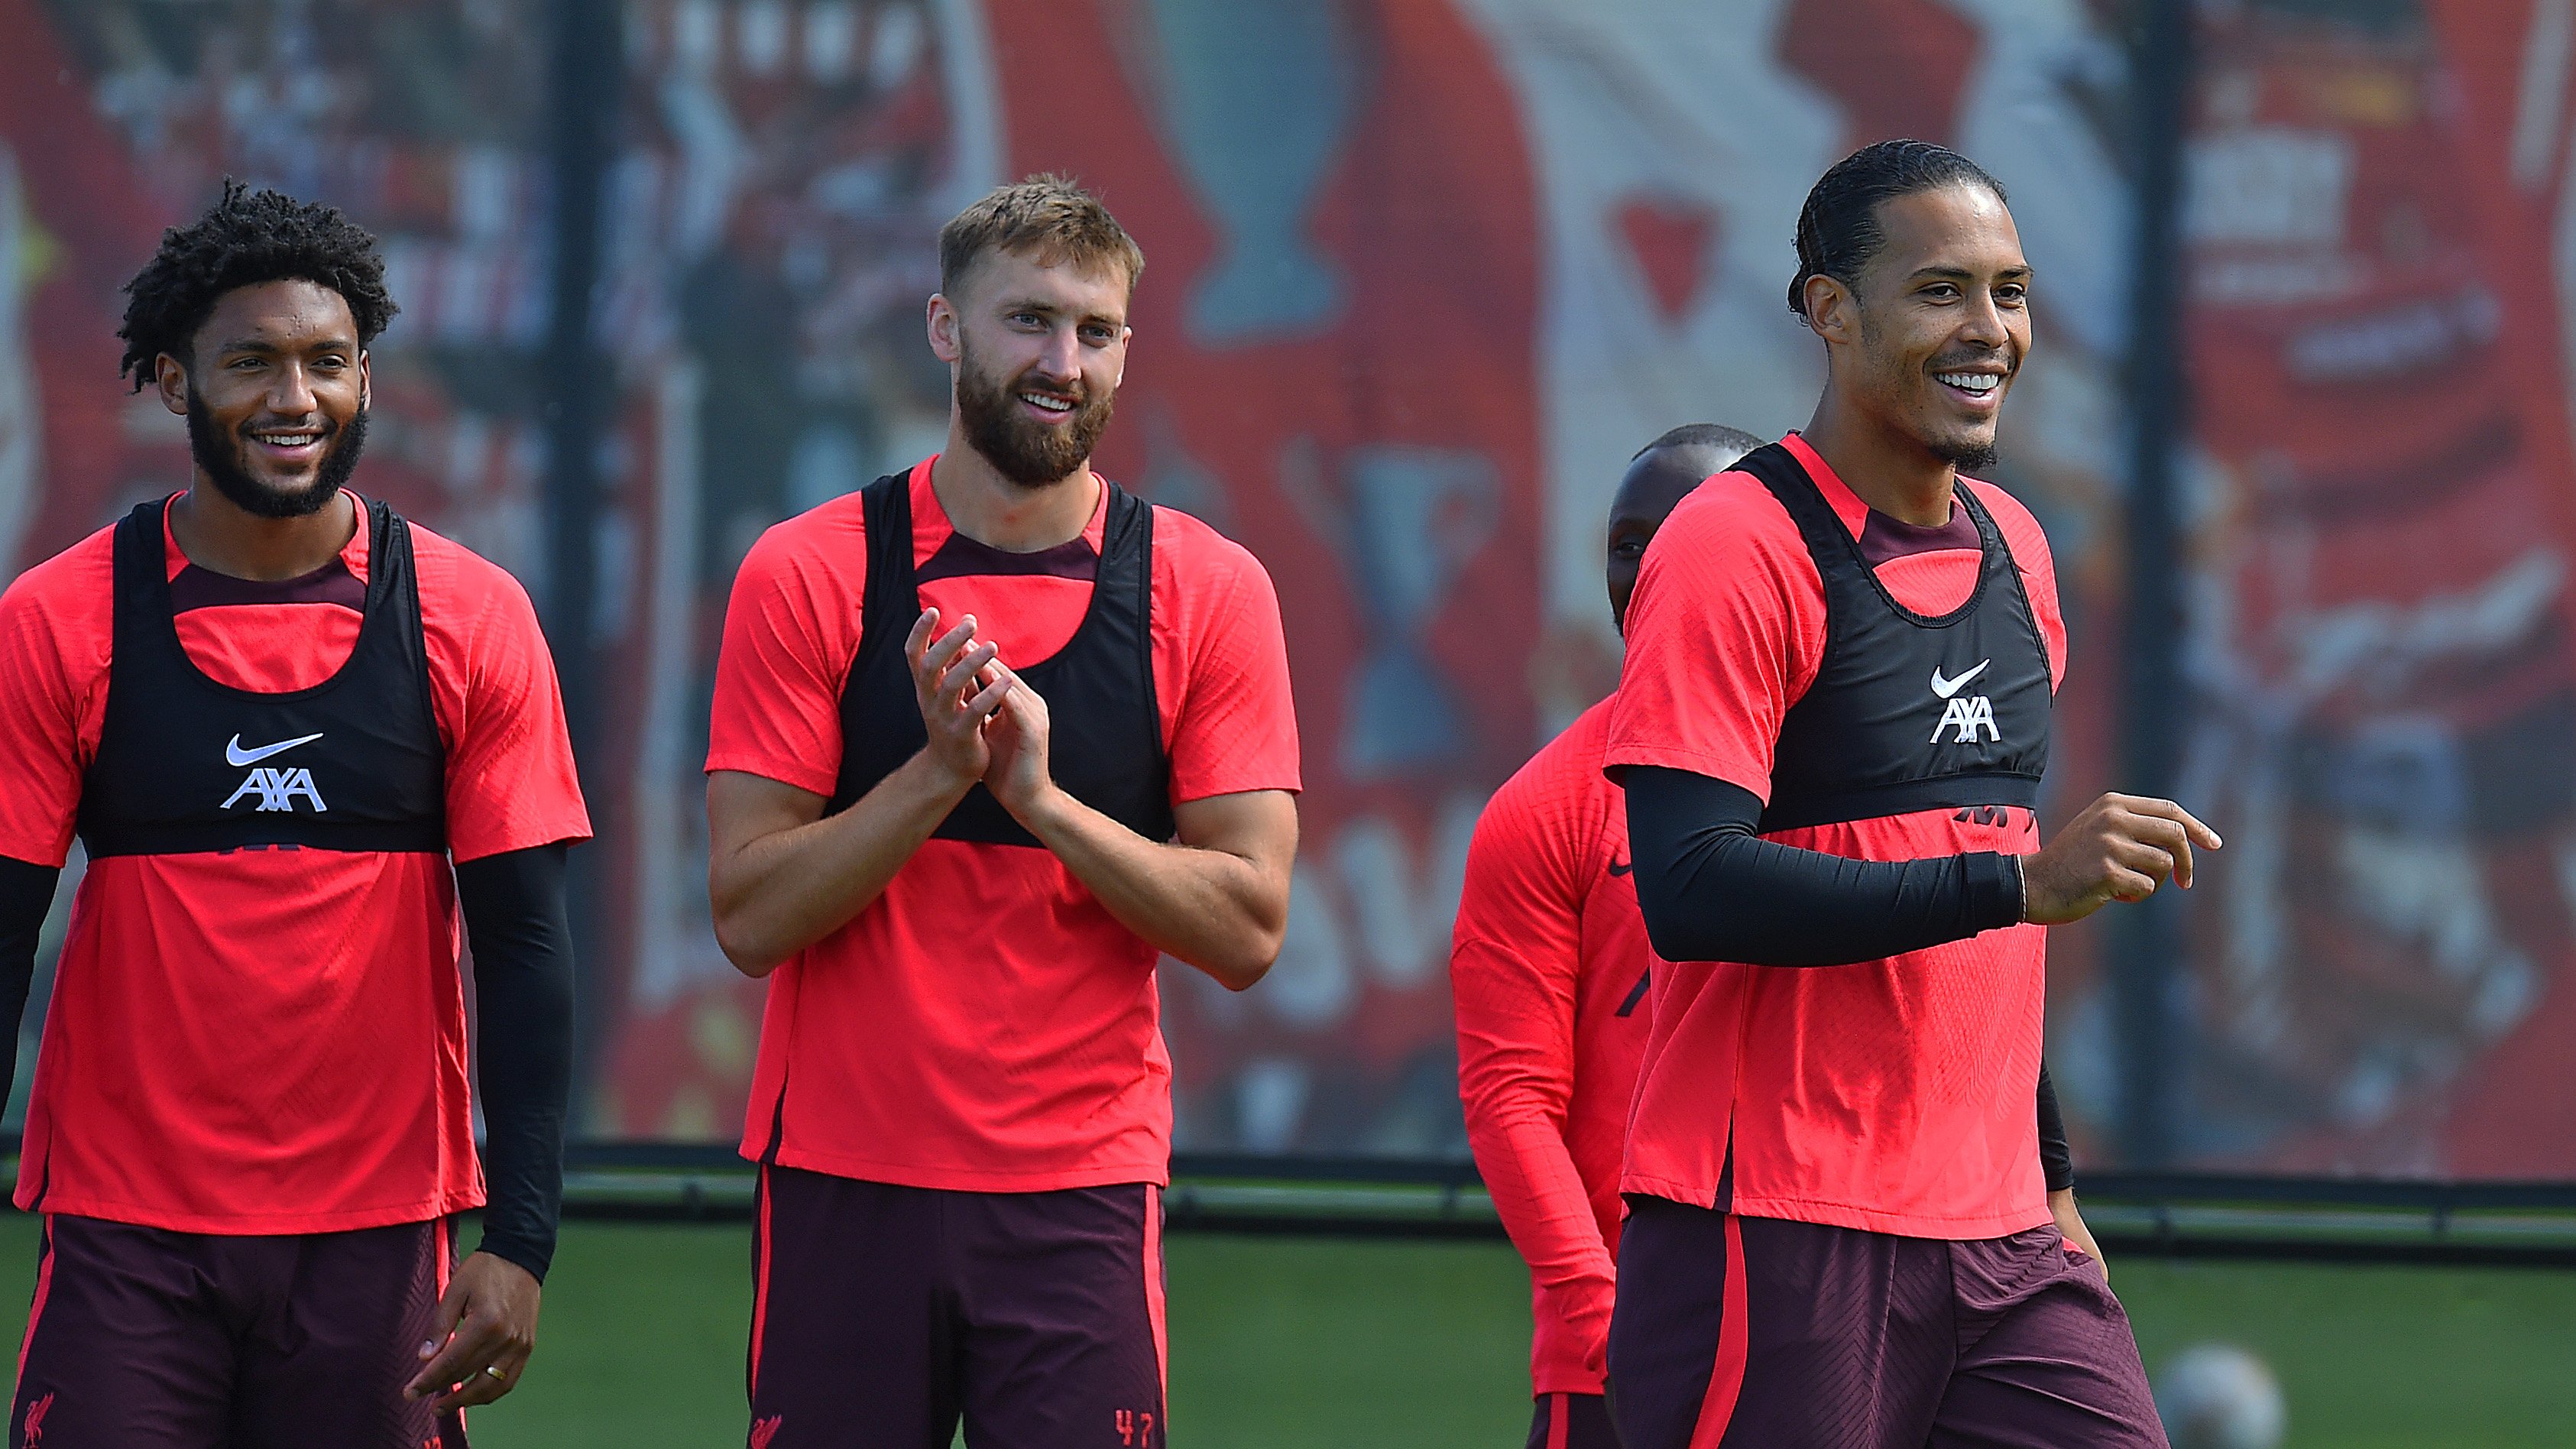 Joe Gomez, Nat Phillips and Virgil van Dijk smile during today's training session ahead of our Premier League fixture against Manchester United.